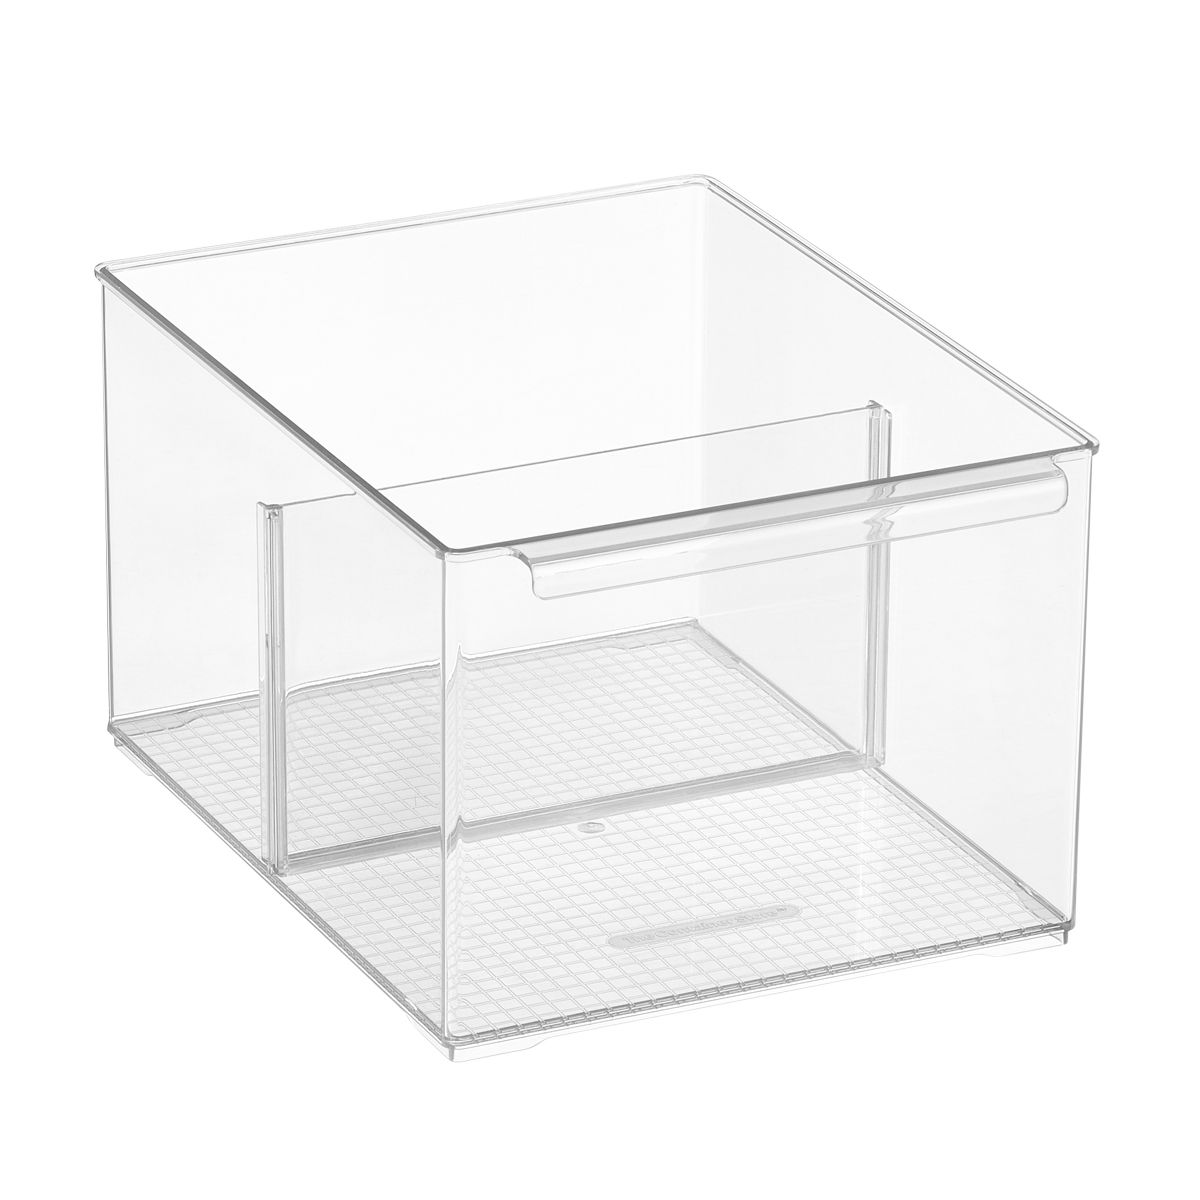 The Everything Organizer Large Cabinet Depth Pantry Bin w/ Divider | The Container Store